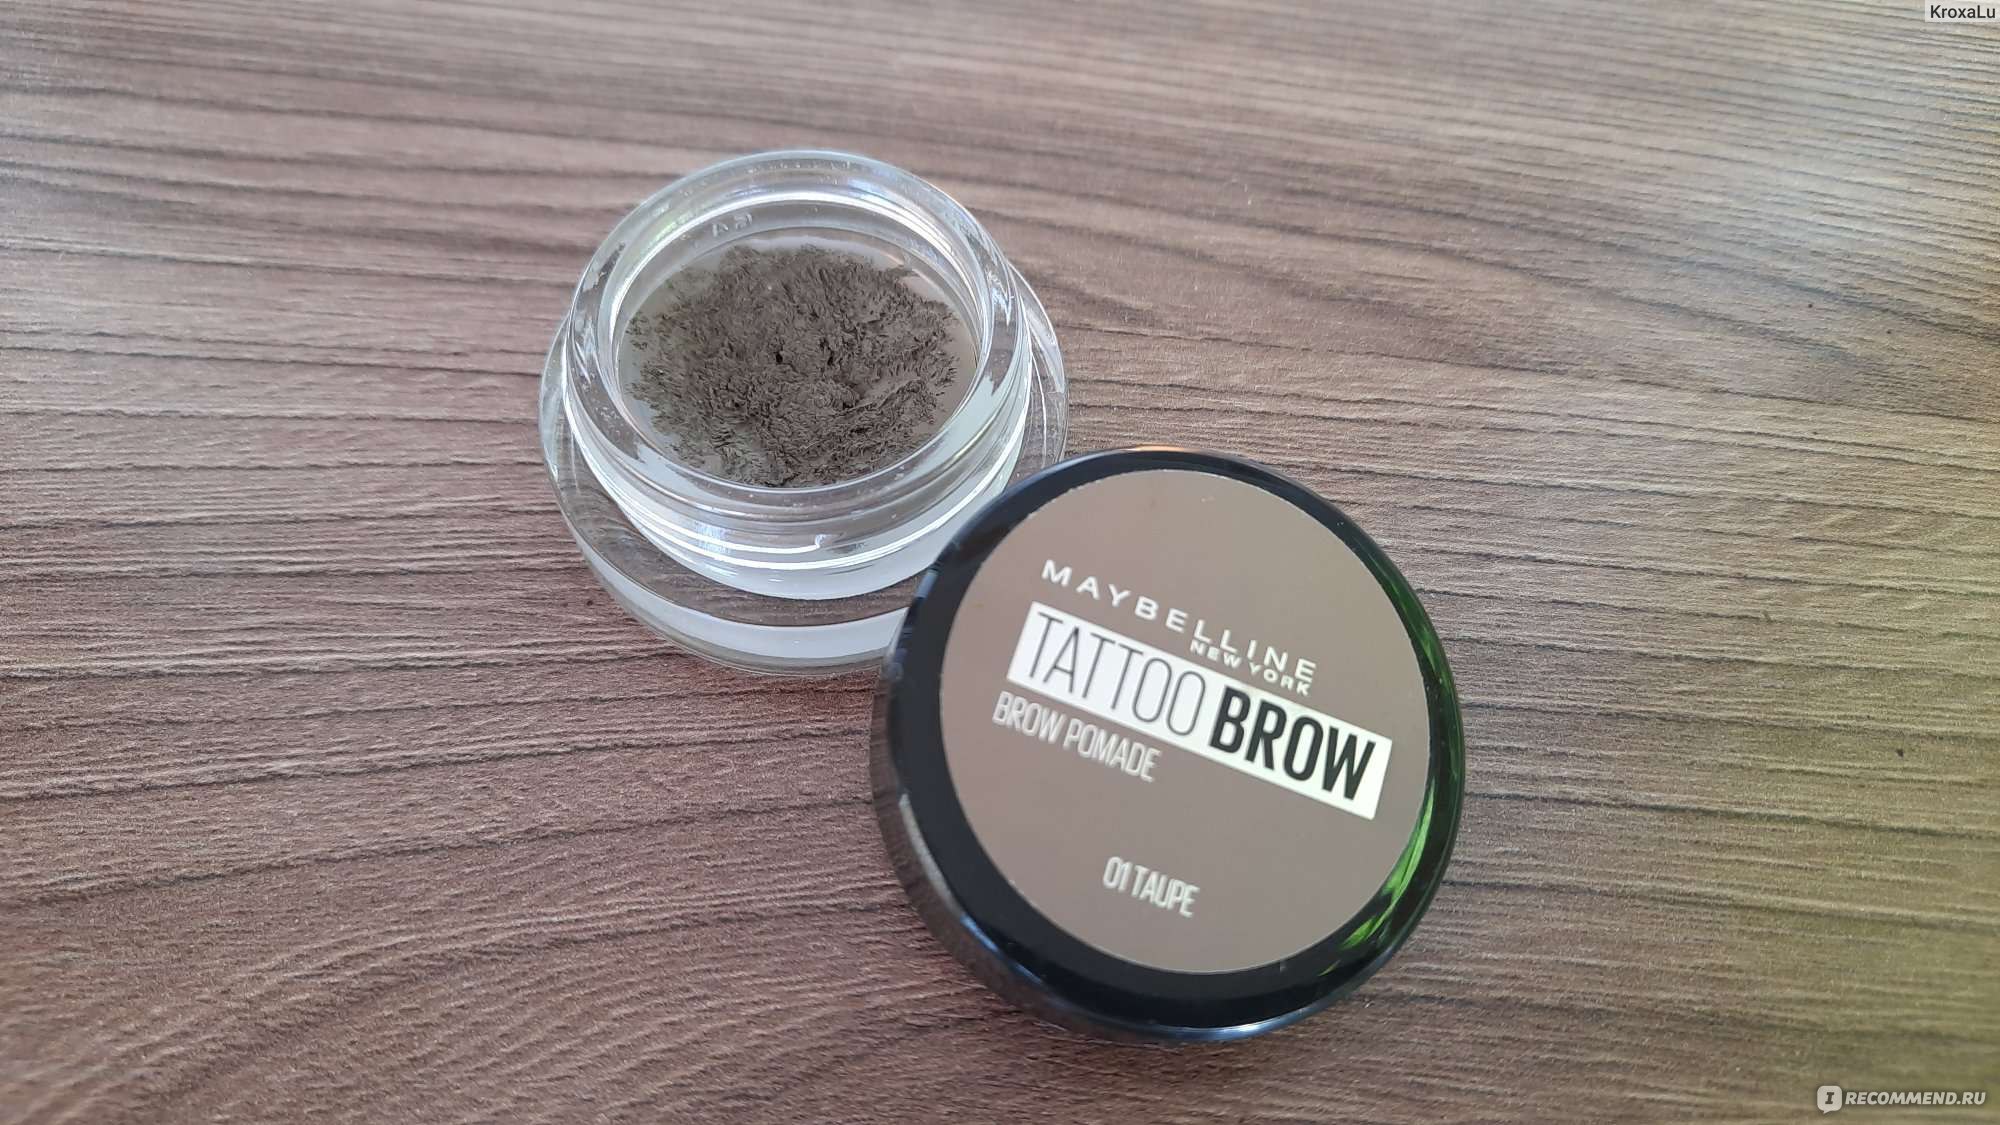 Maybelline Tattoo Brow 01 Taupe